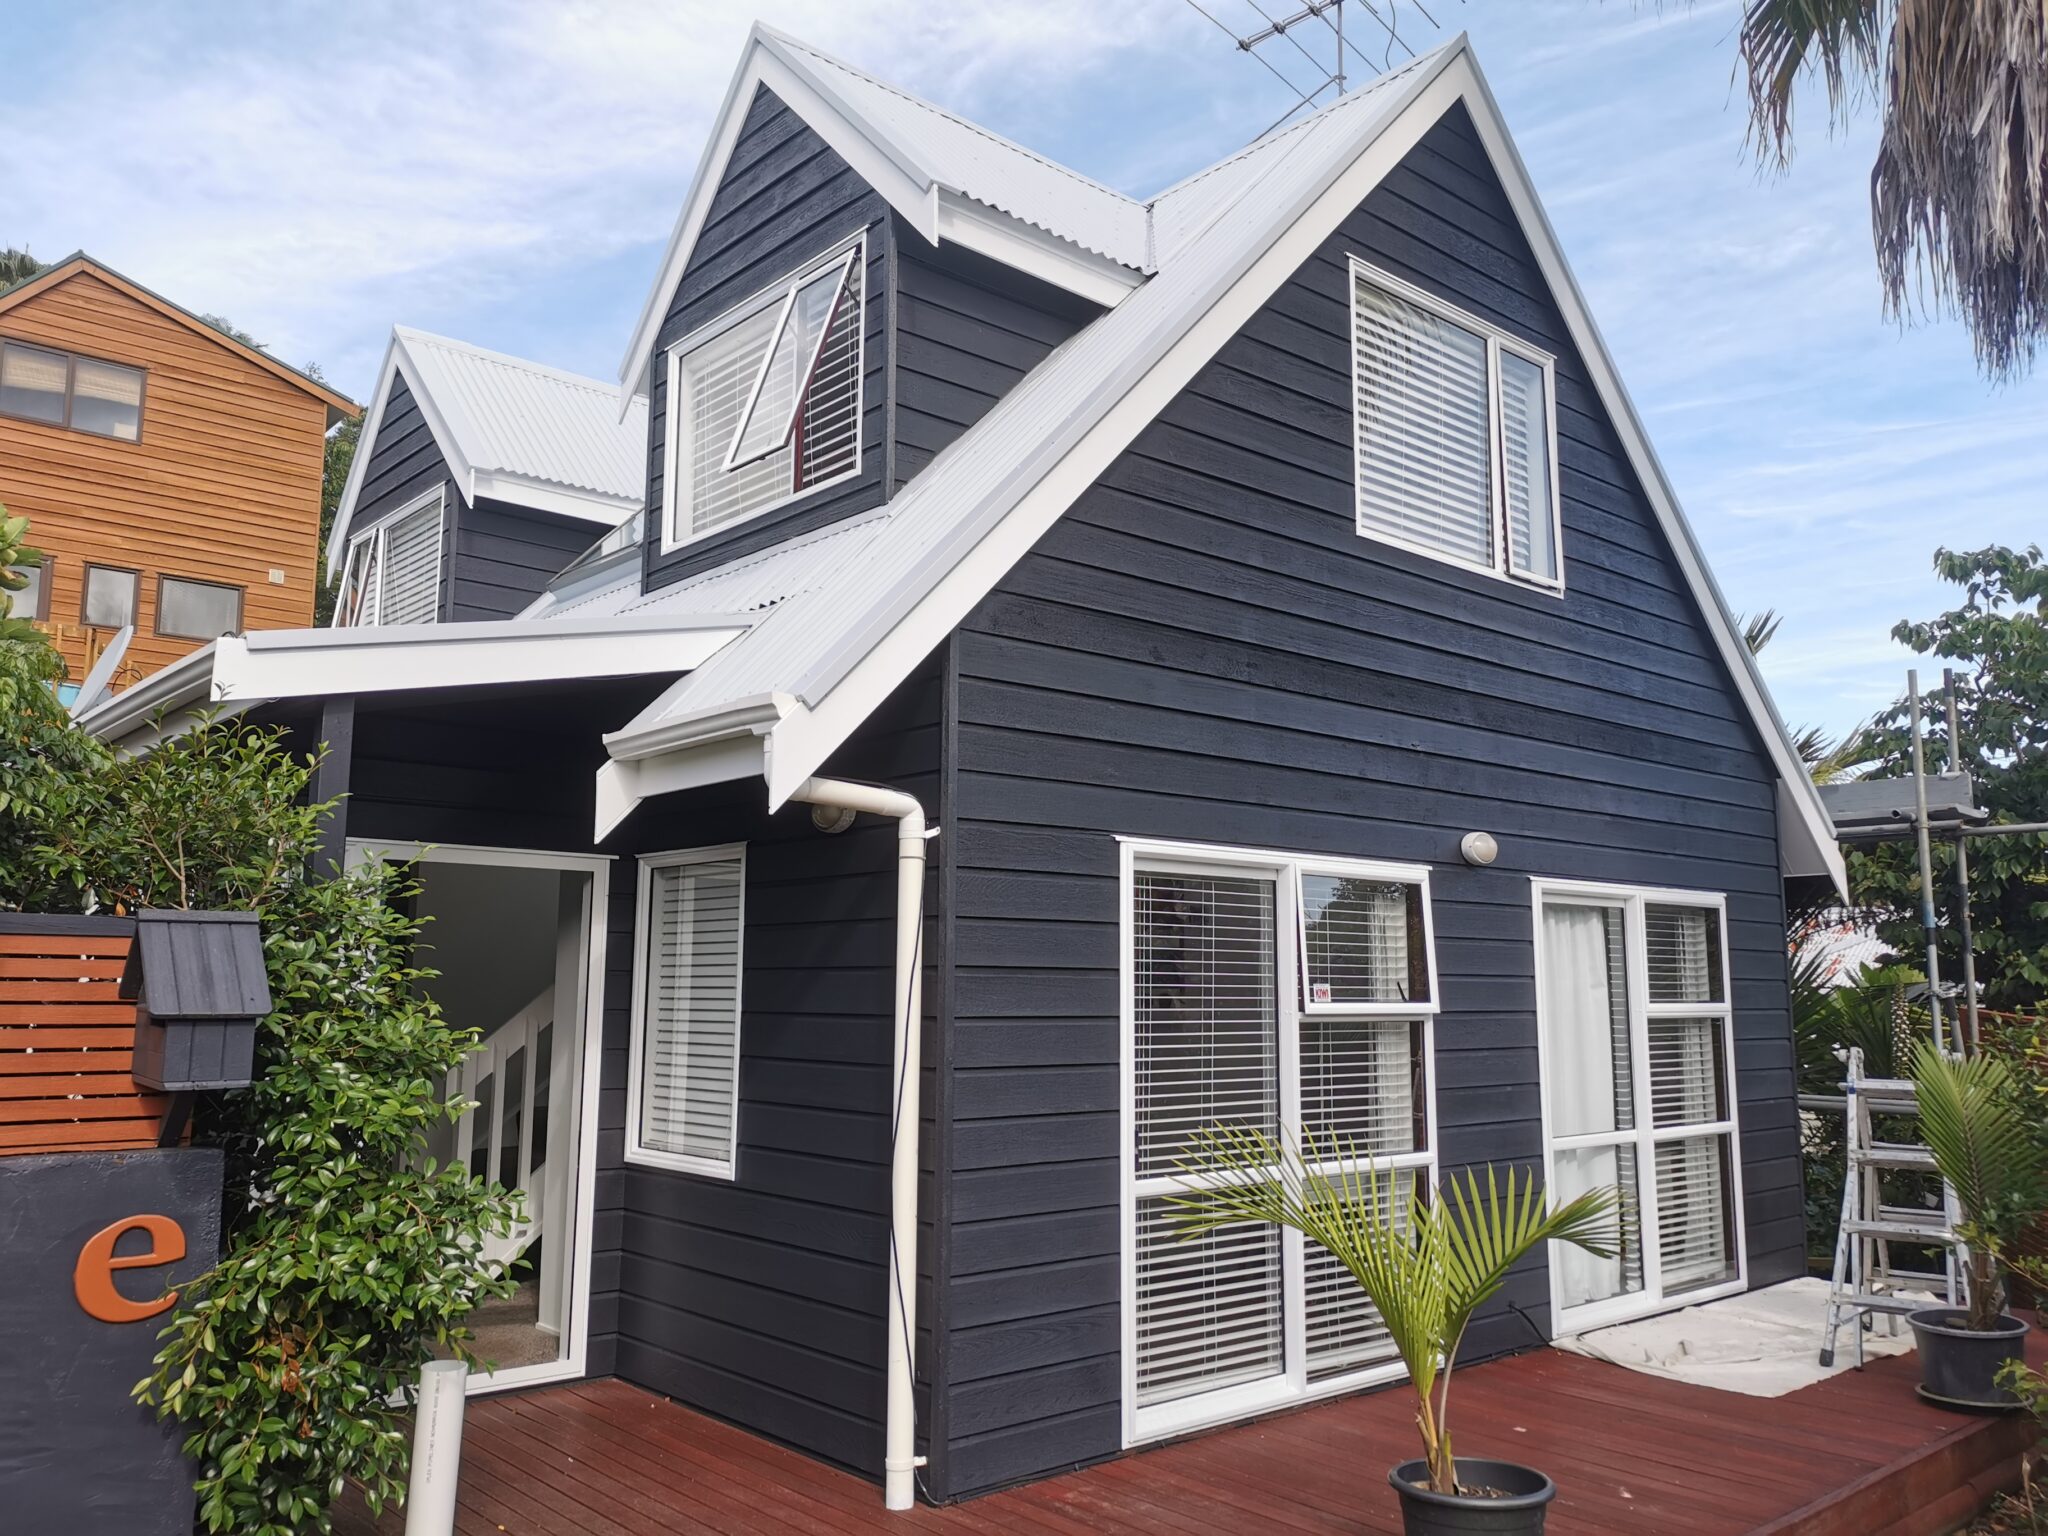 Both the inside and outside of Auckland homes can be painted by Zeolispainters.